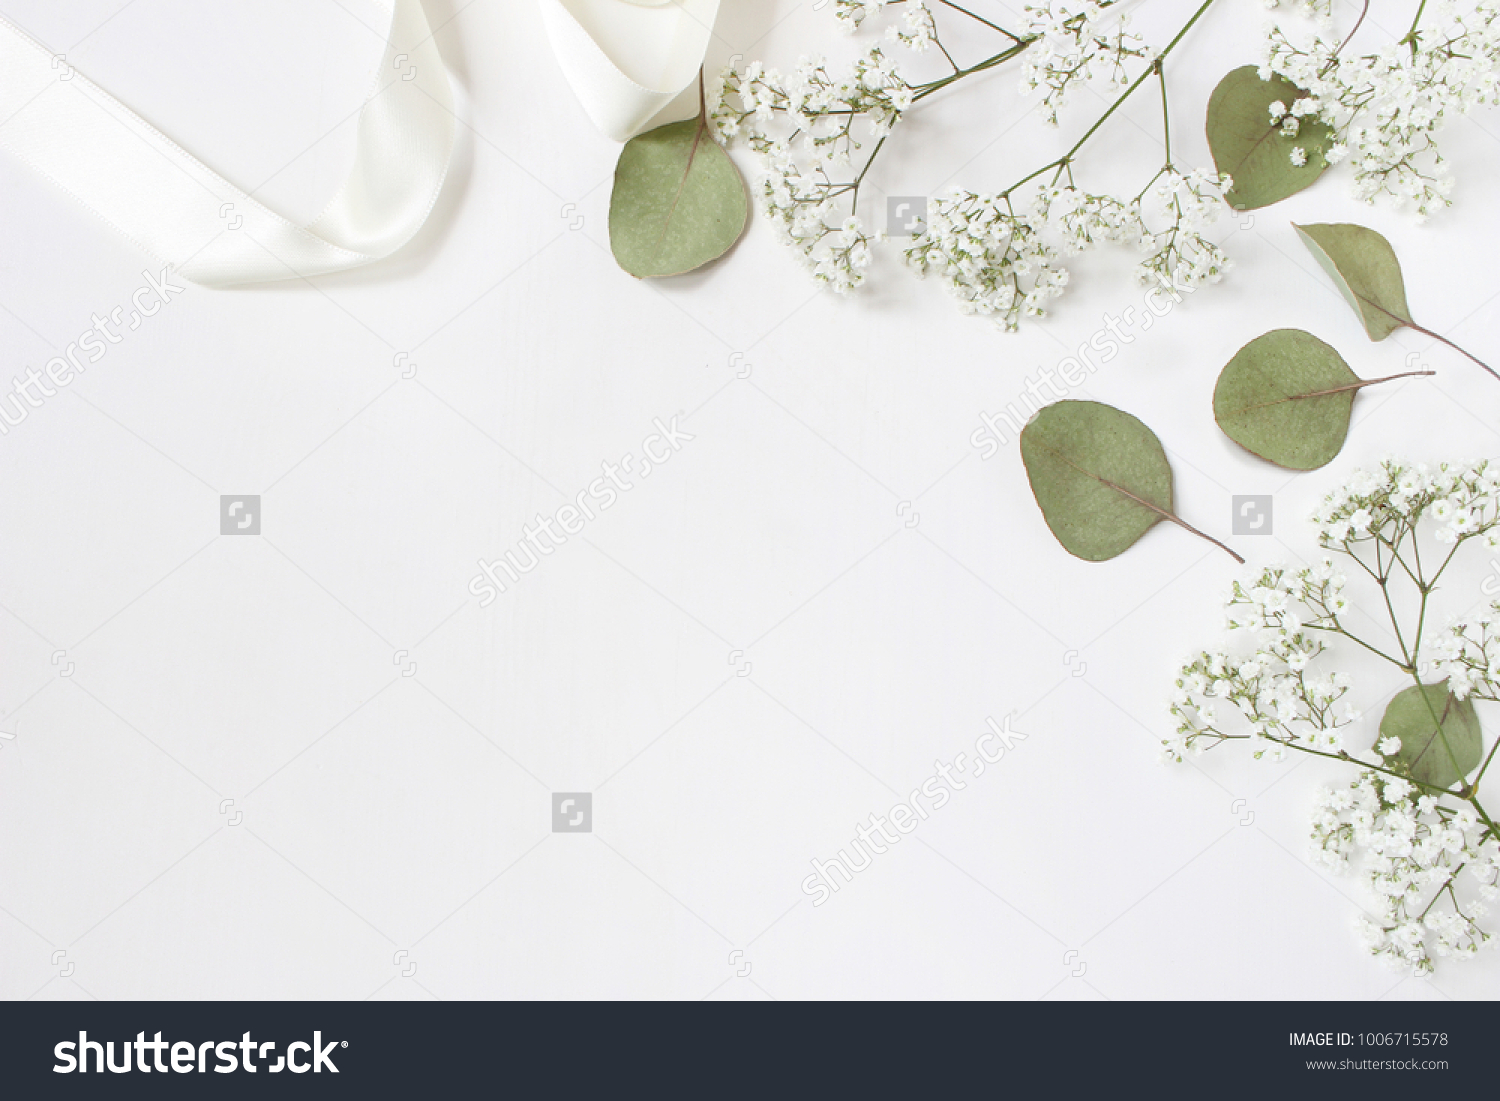 Styled stock photo. Feminine wedding desktop mockup with baby's breath Gypsophila flowers, dry green eucalyptus leaves, satin ribbon and white background. Empty space. Top view. Picture for blog. #1006715578